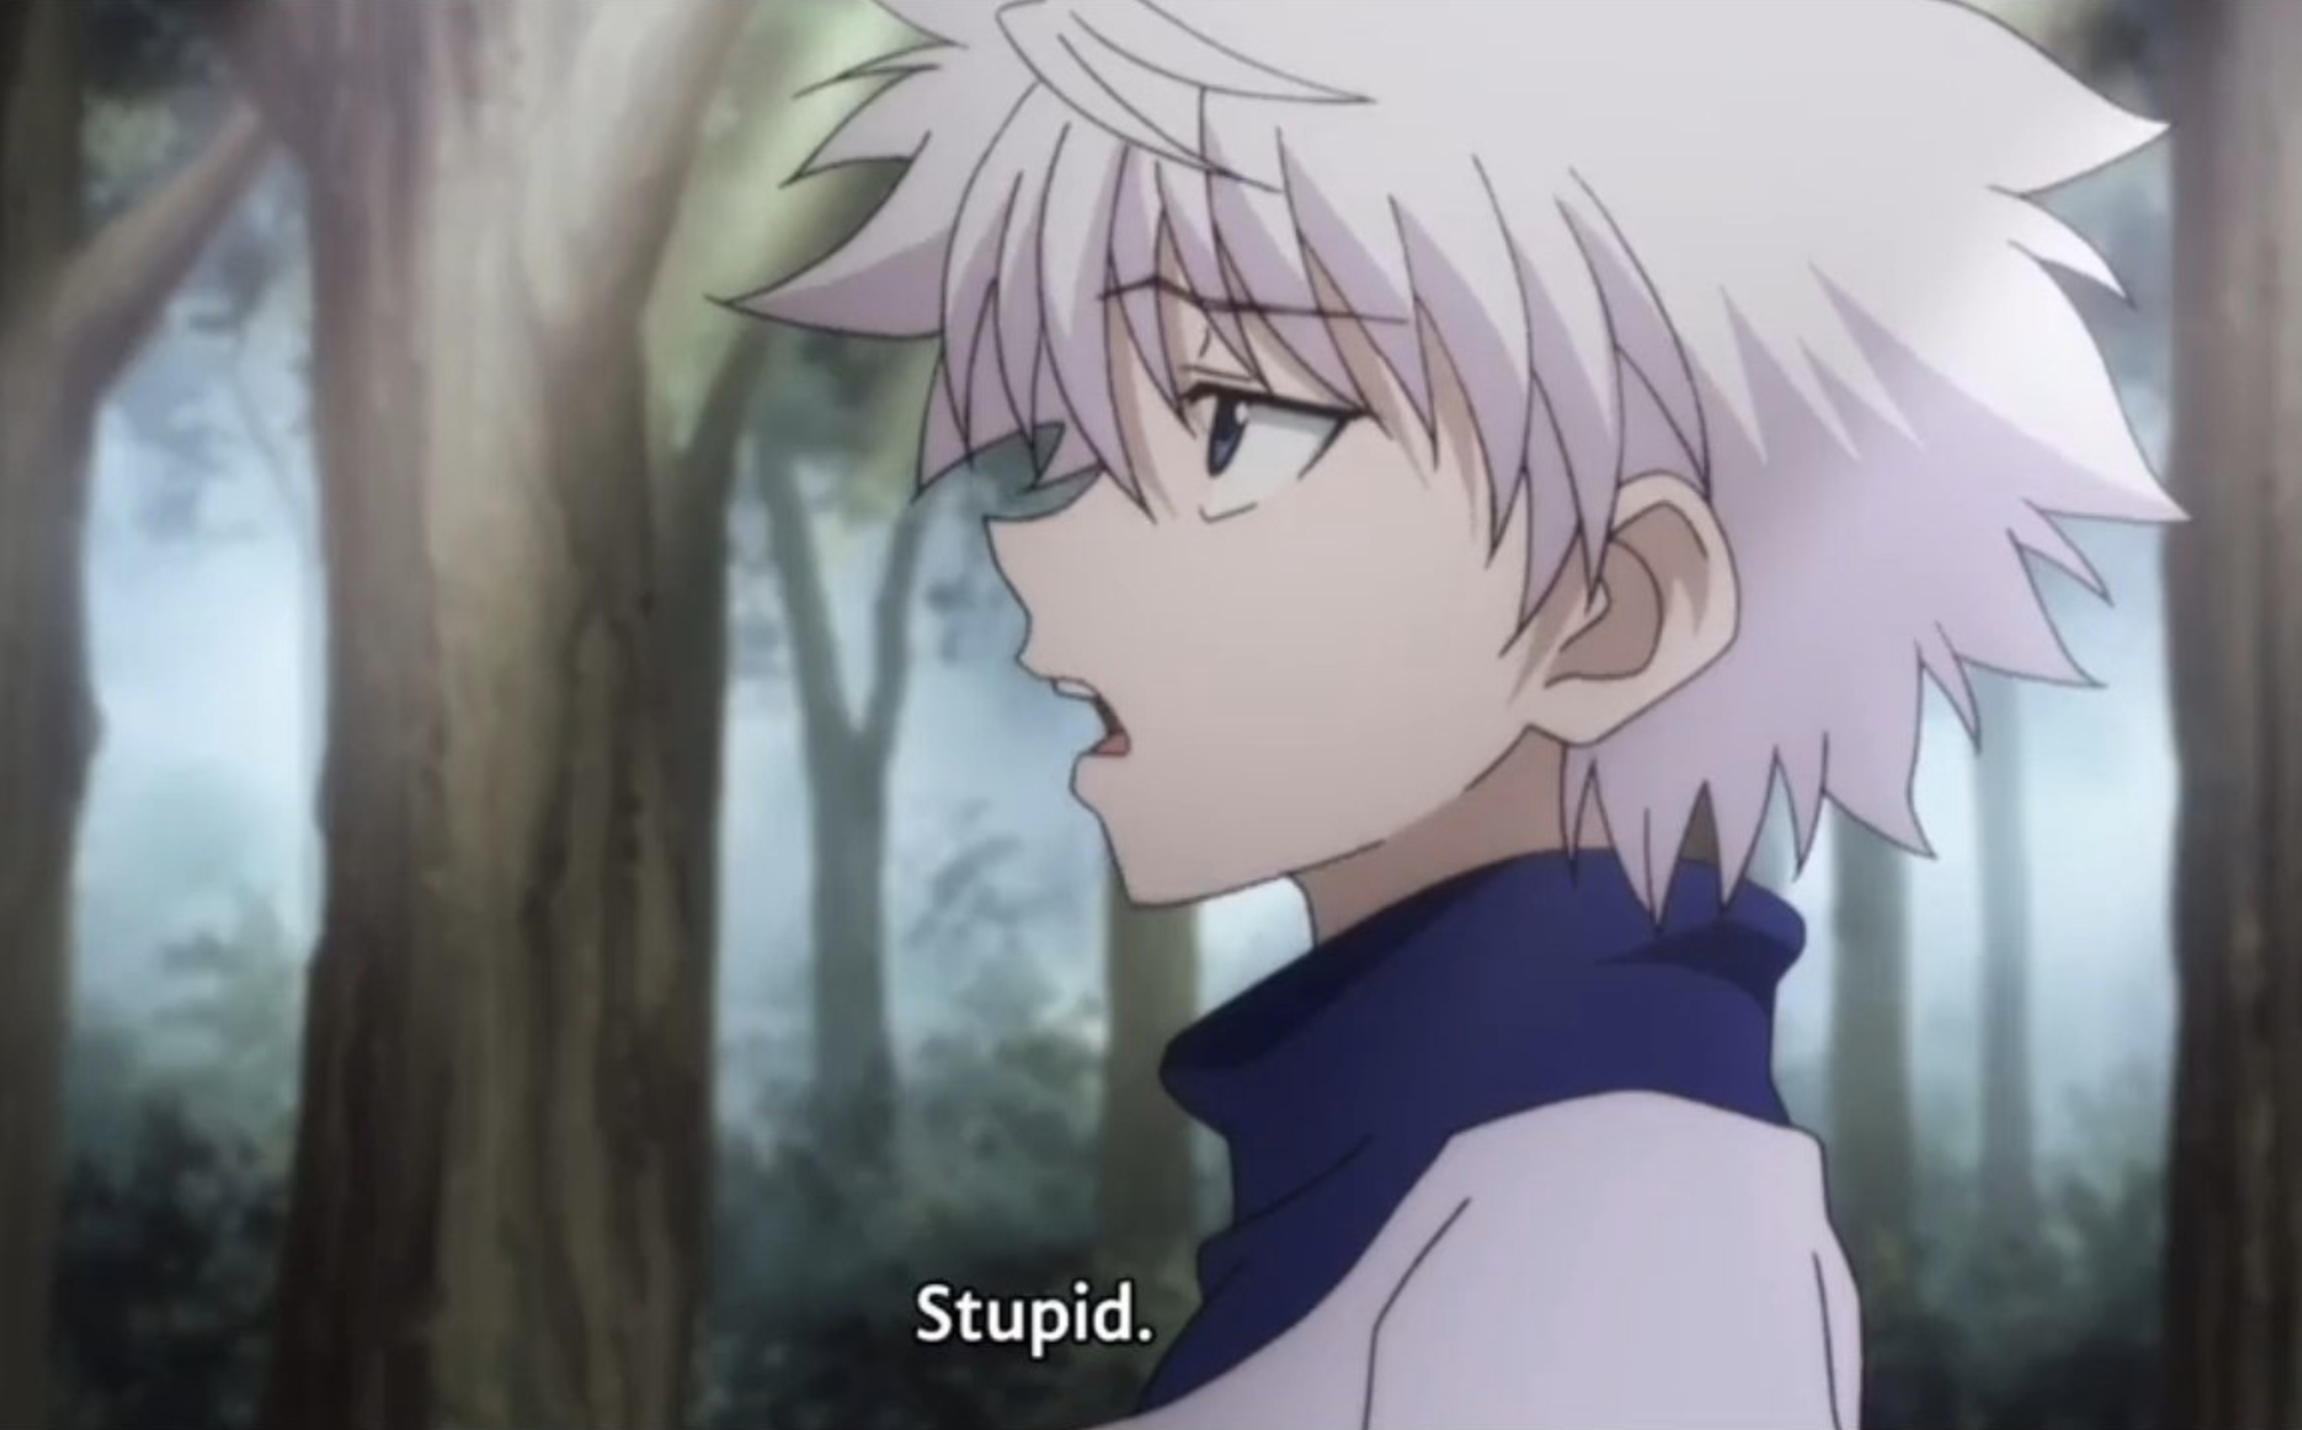 A white haired anime character saying &quot;baka&quot; which means &quot;stupid&quot; or &quot;idiot&quot;